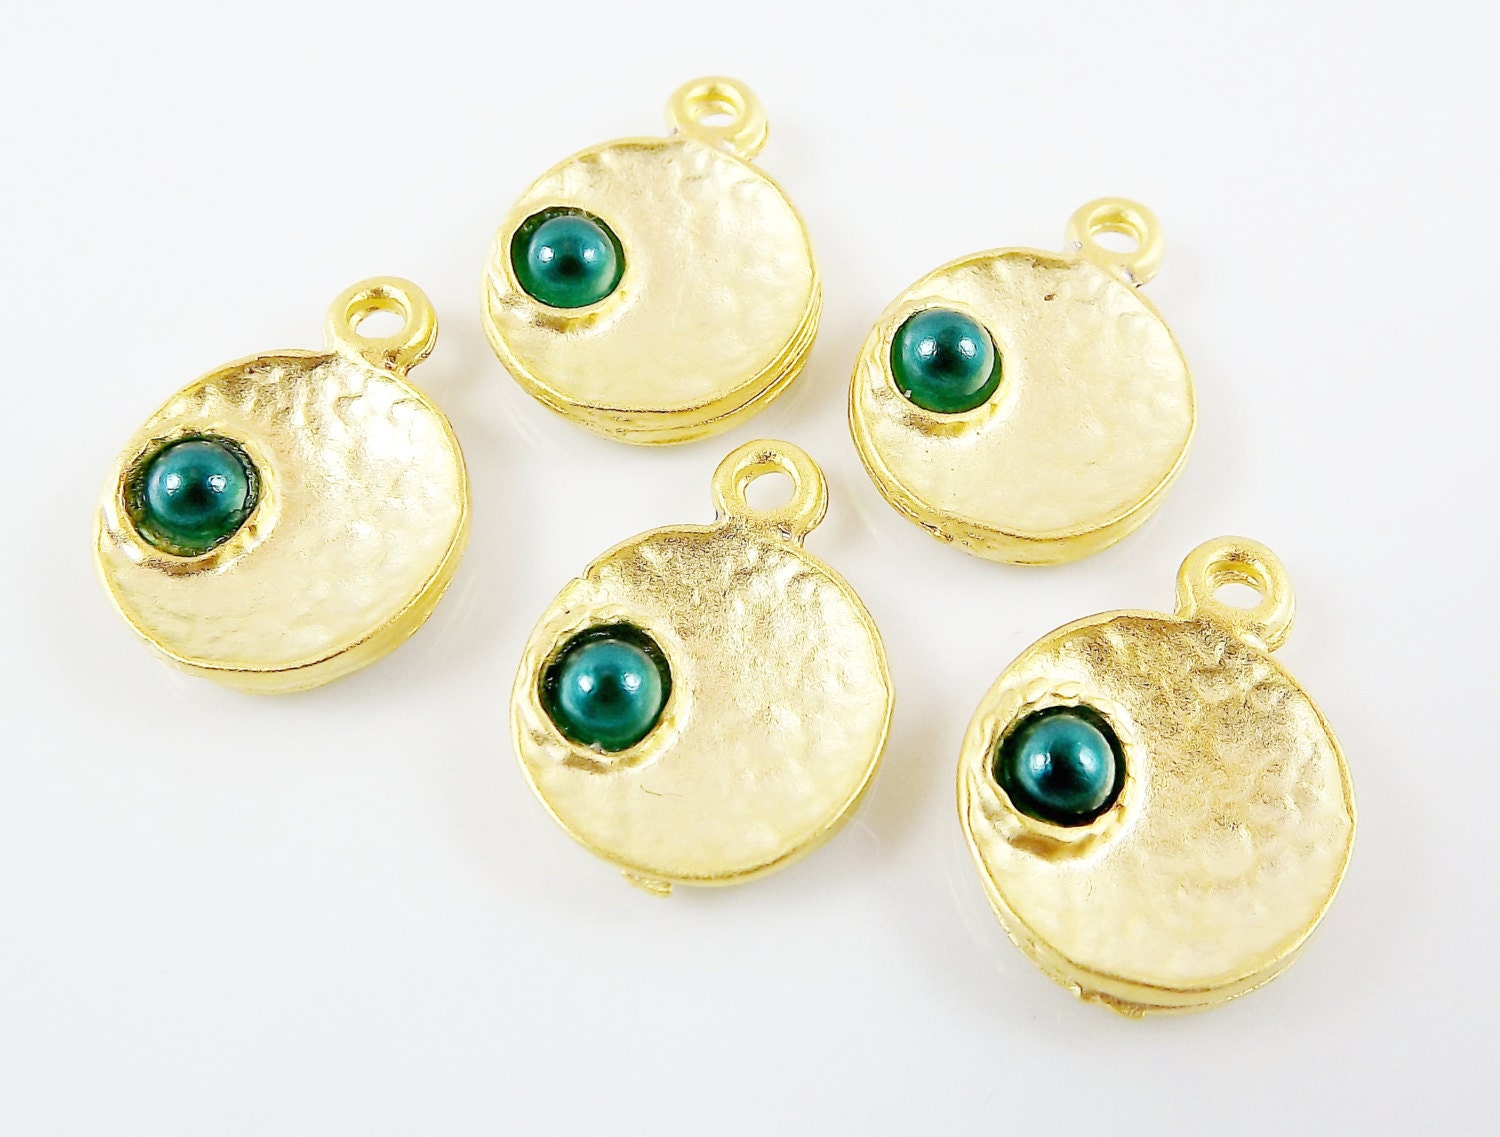 NEW - 5 Teal Green Pearl Bead 22k Matte Gold Plated Inverted Dome Shaped Charms